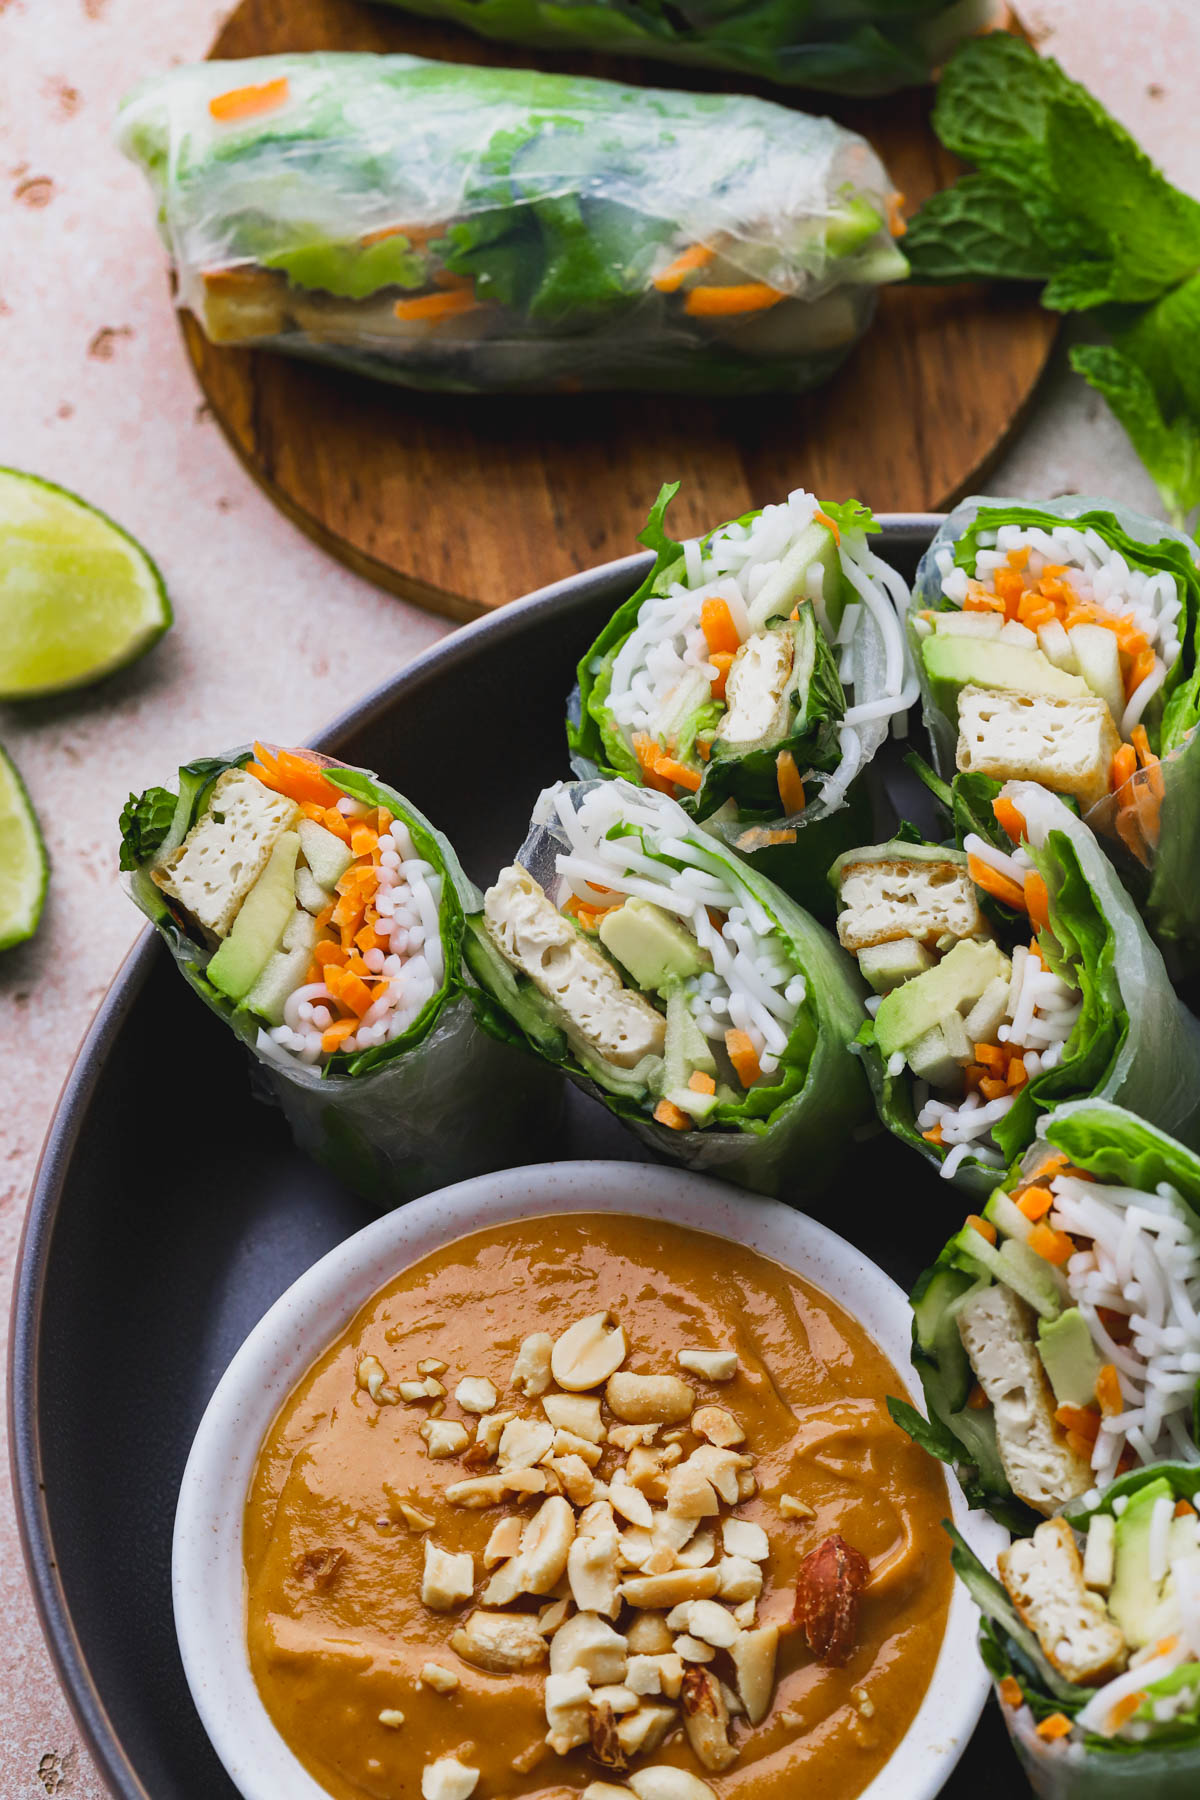 Summer rolls filled with tofu, vegetables, avocado, green apple, noodles and served with spicy peanut sauce. 